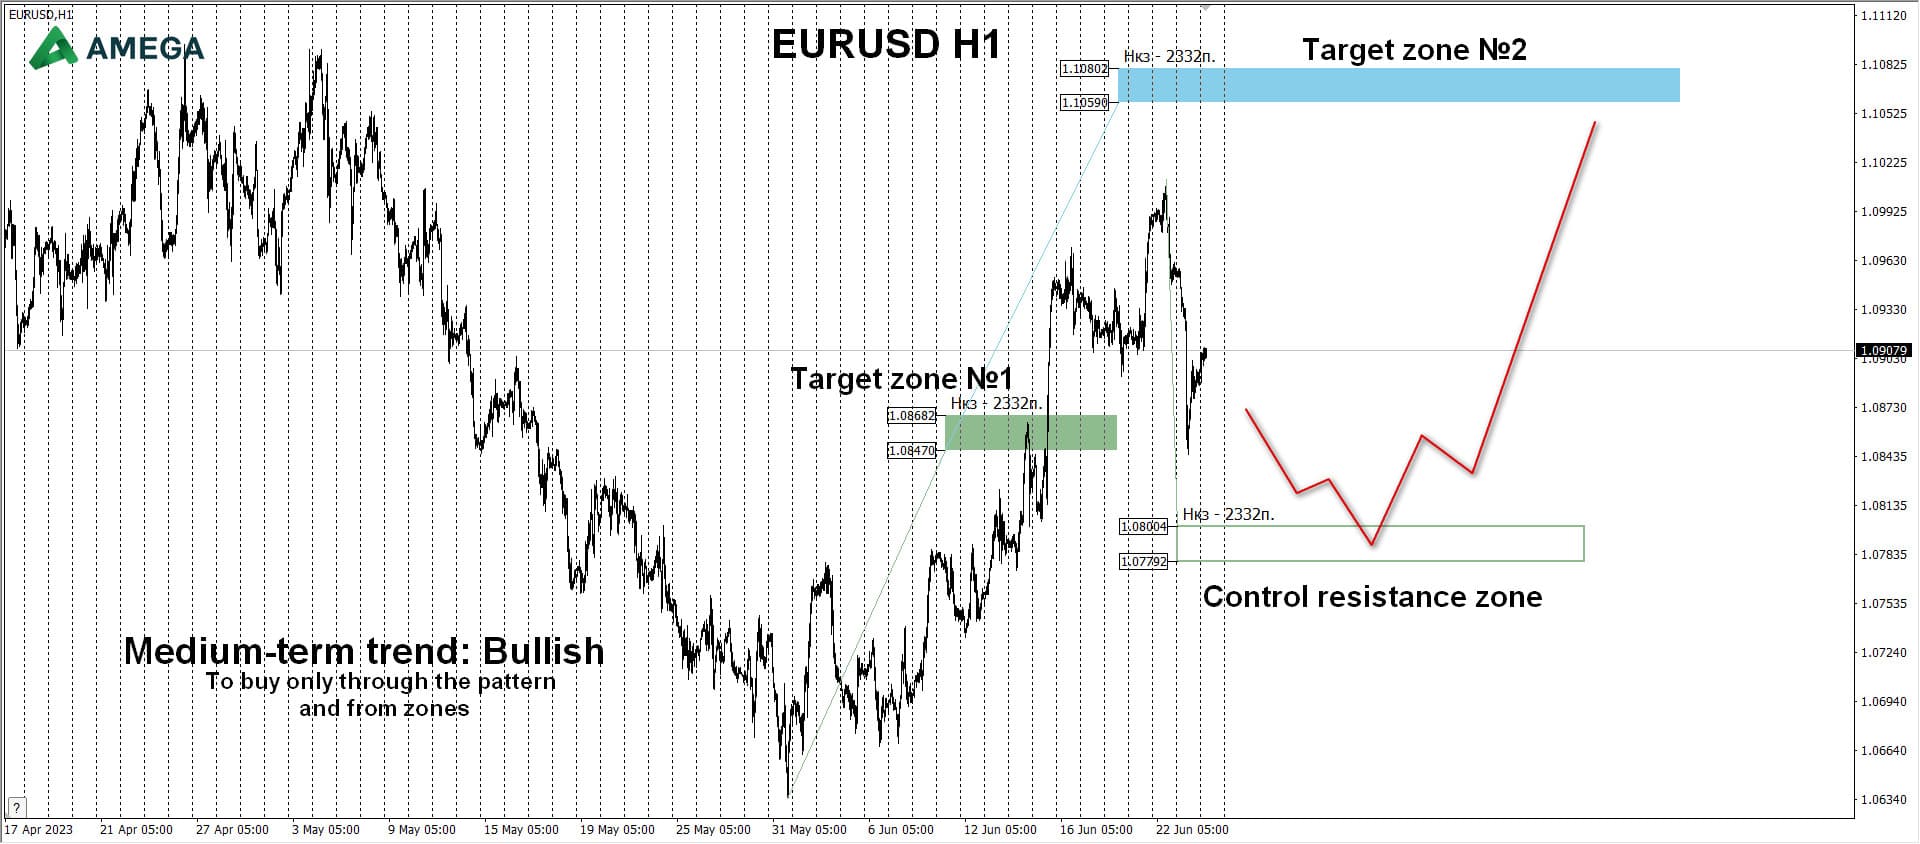 The price has already reached the target zone №1 1.08682-1.08470